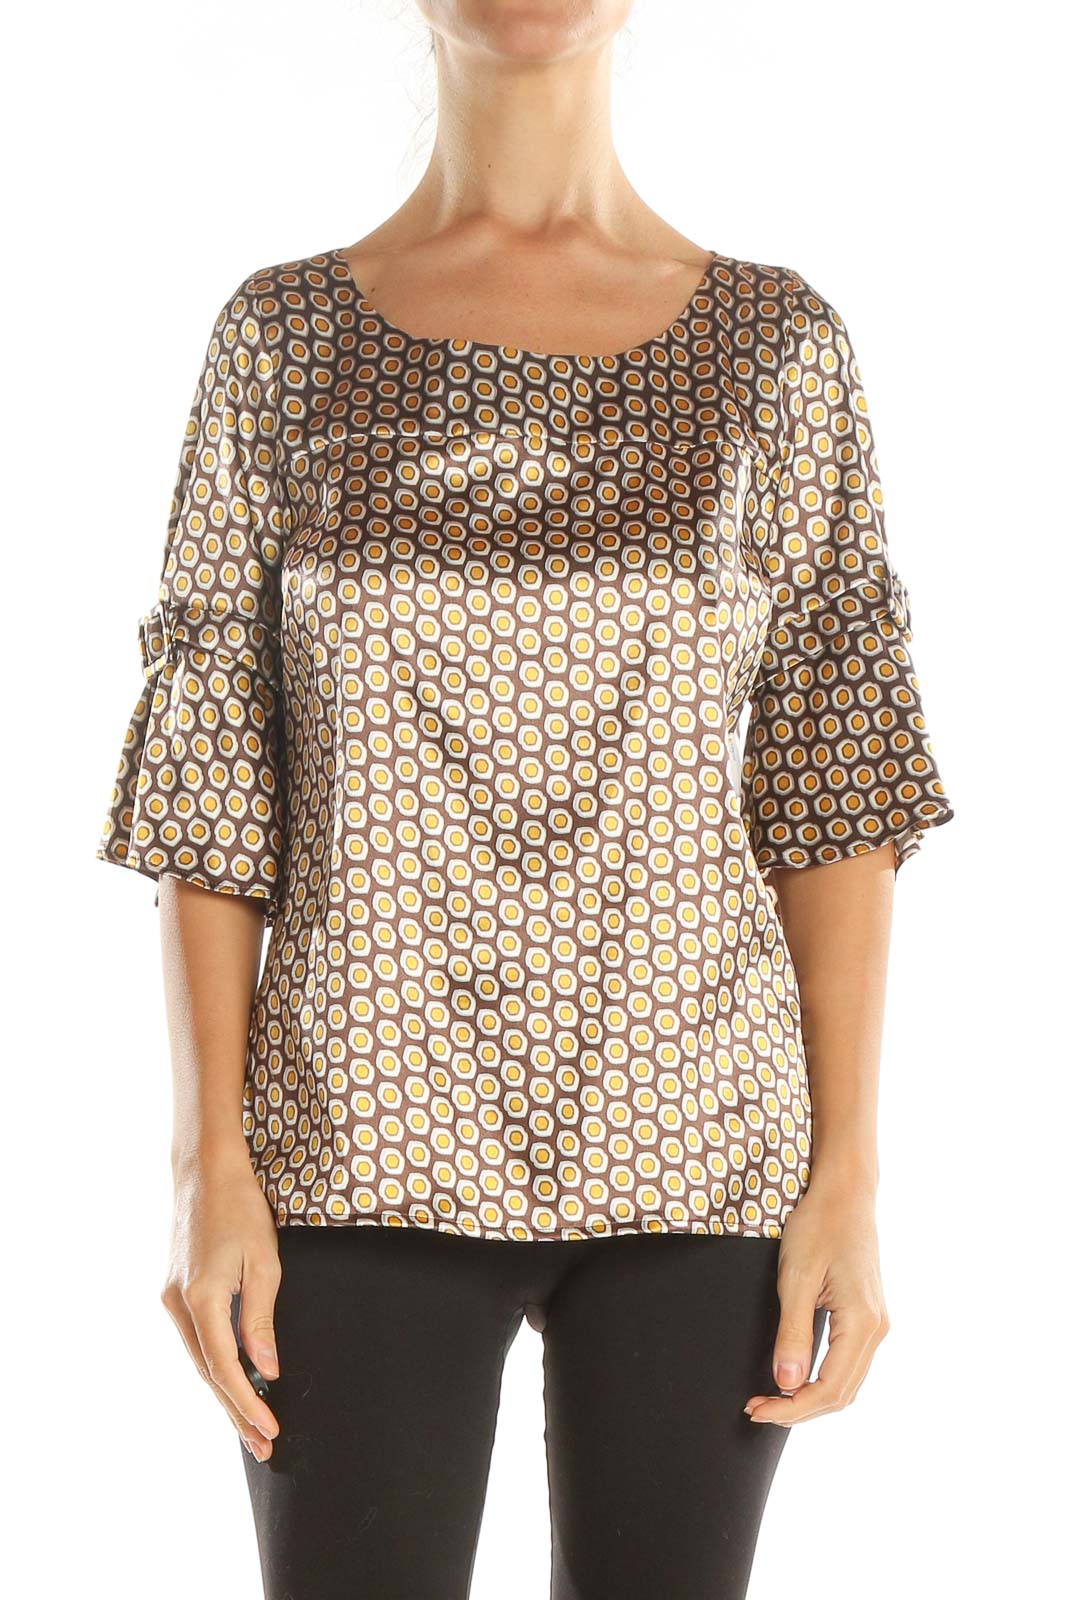 Brown Printed Retro Blouse Front